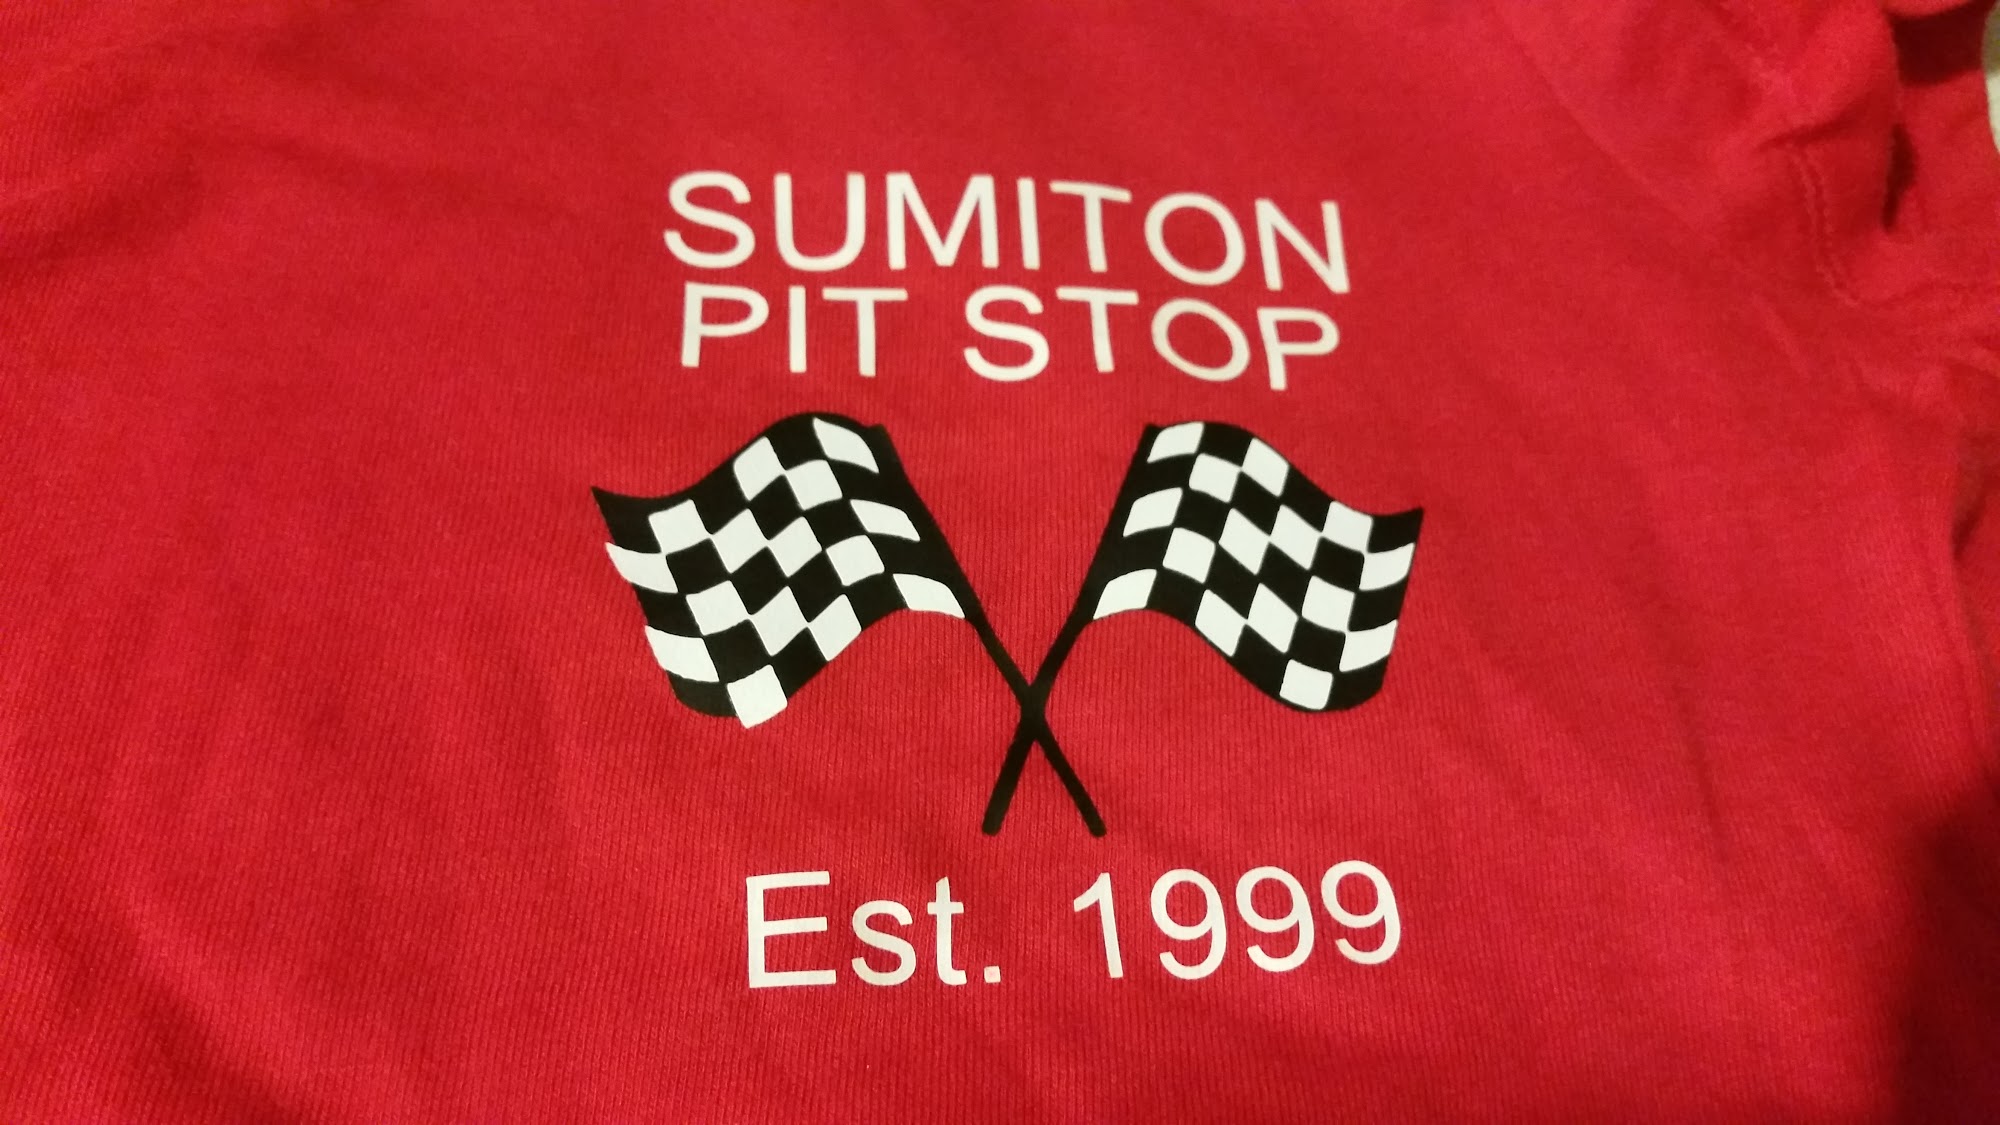 Sumiton Pit Stop